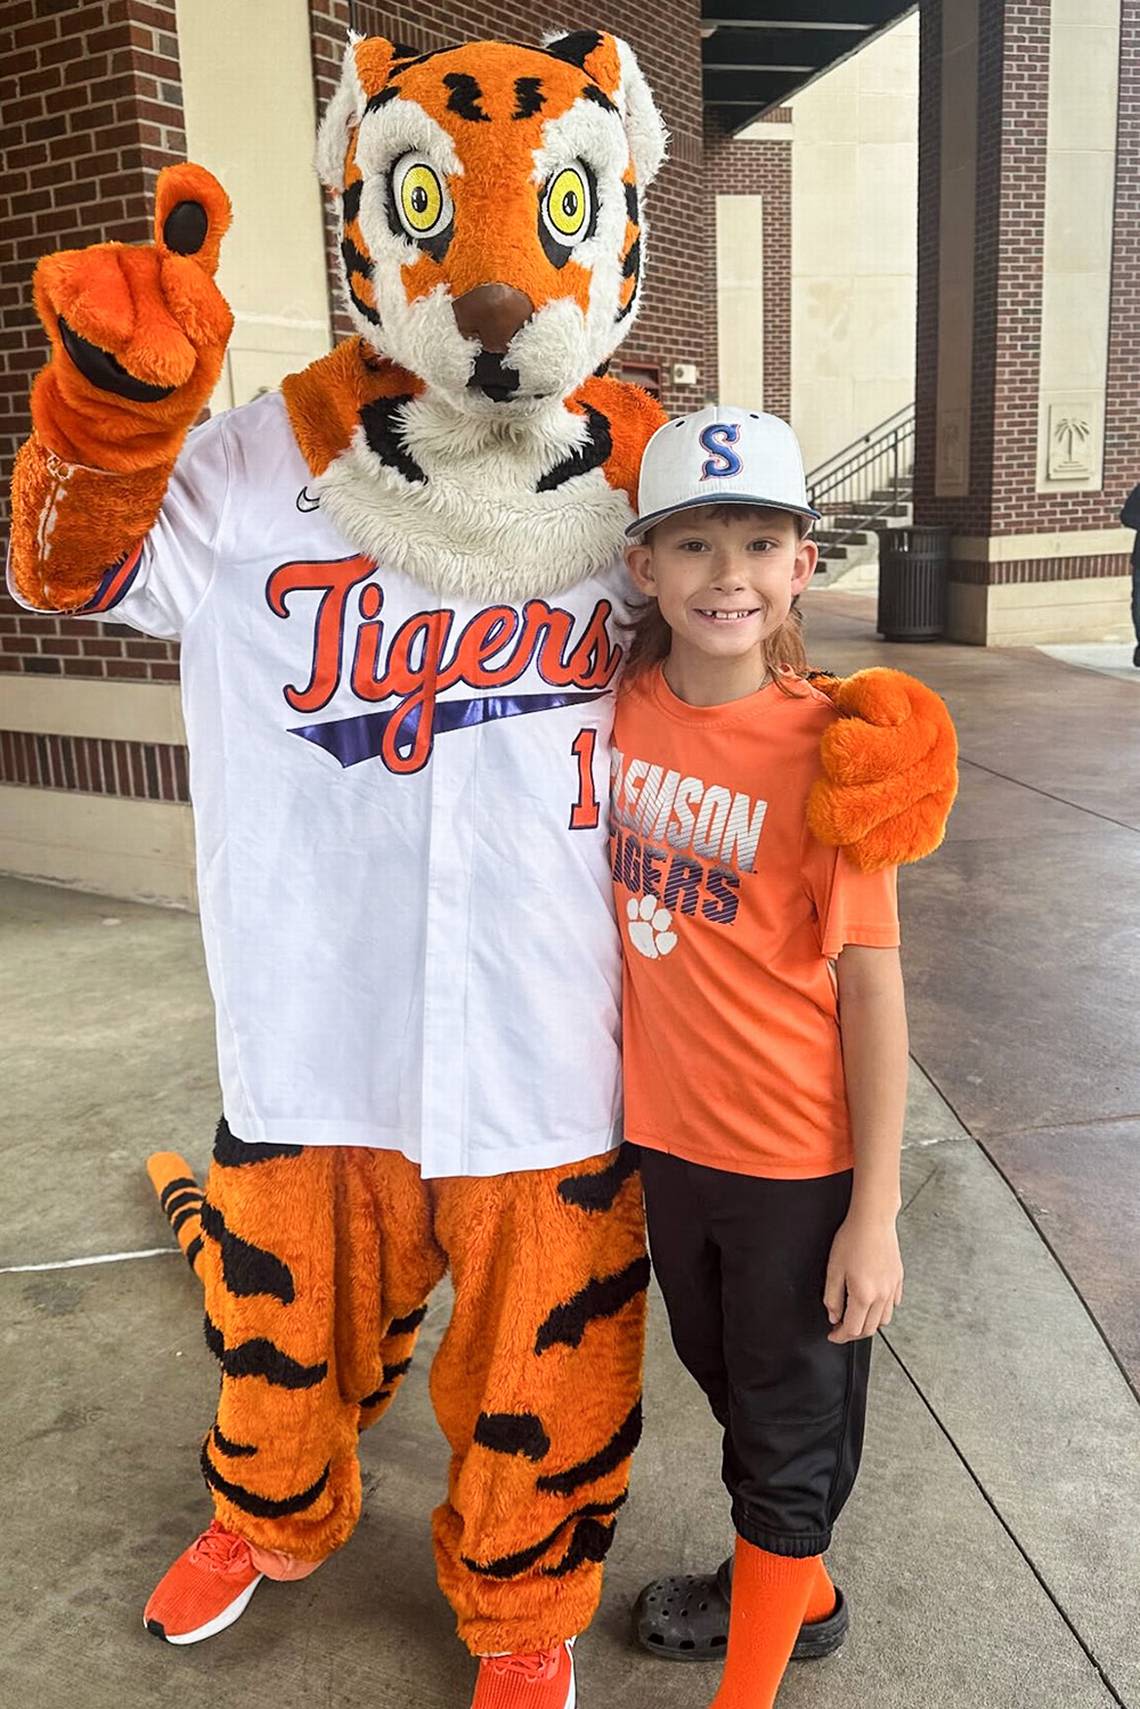 After ‘tragic accident,’ Clemson baseball honors 10-year-old fan with roster spot